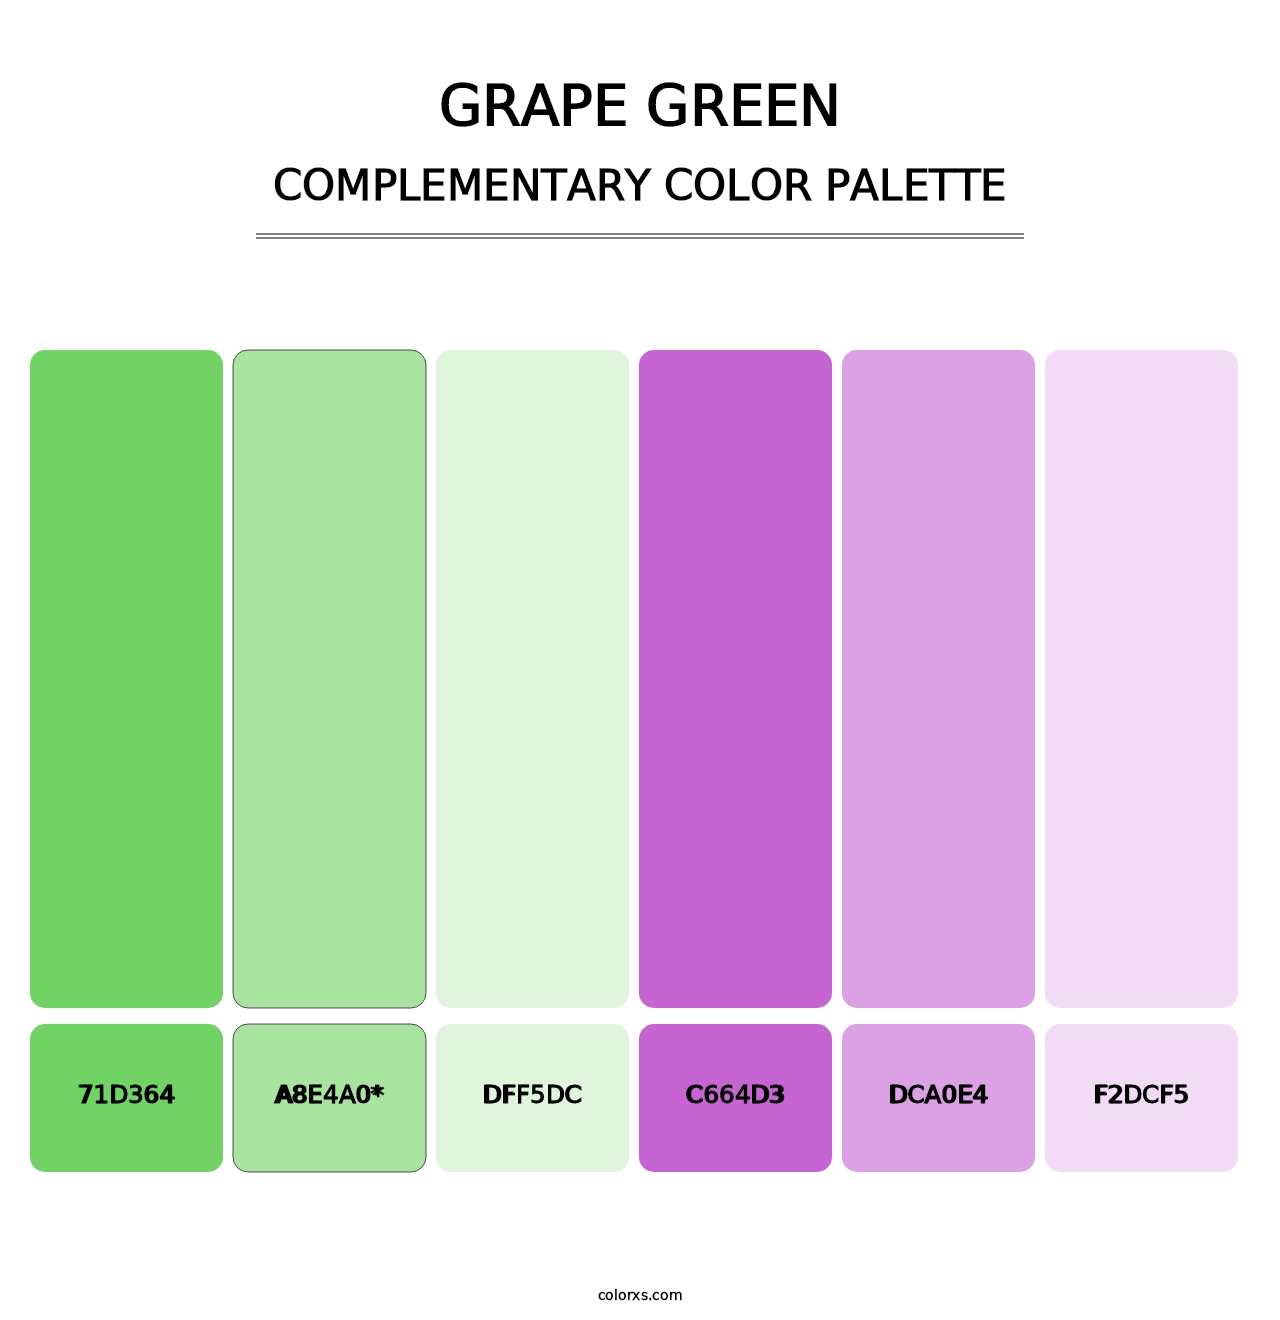 Grape Green - Complementary Color Palette